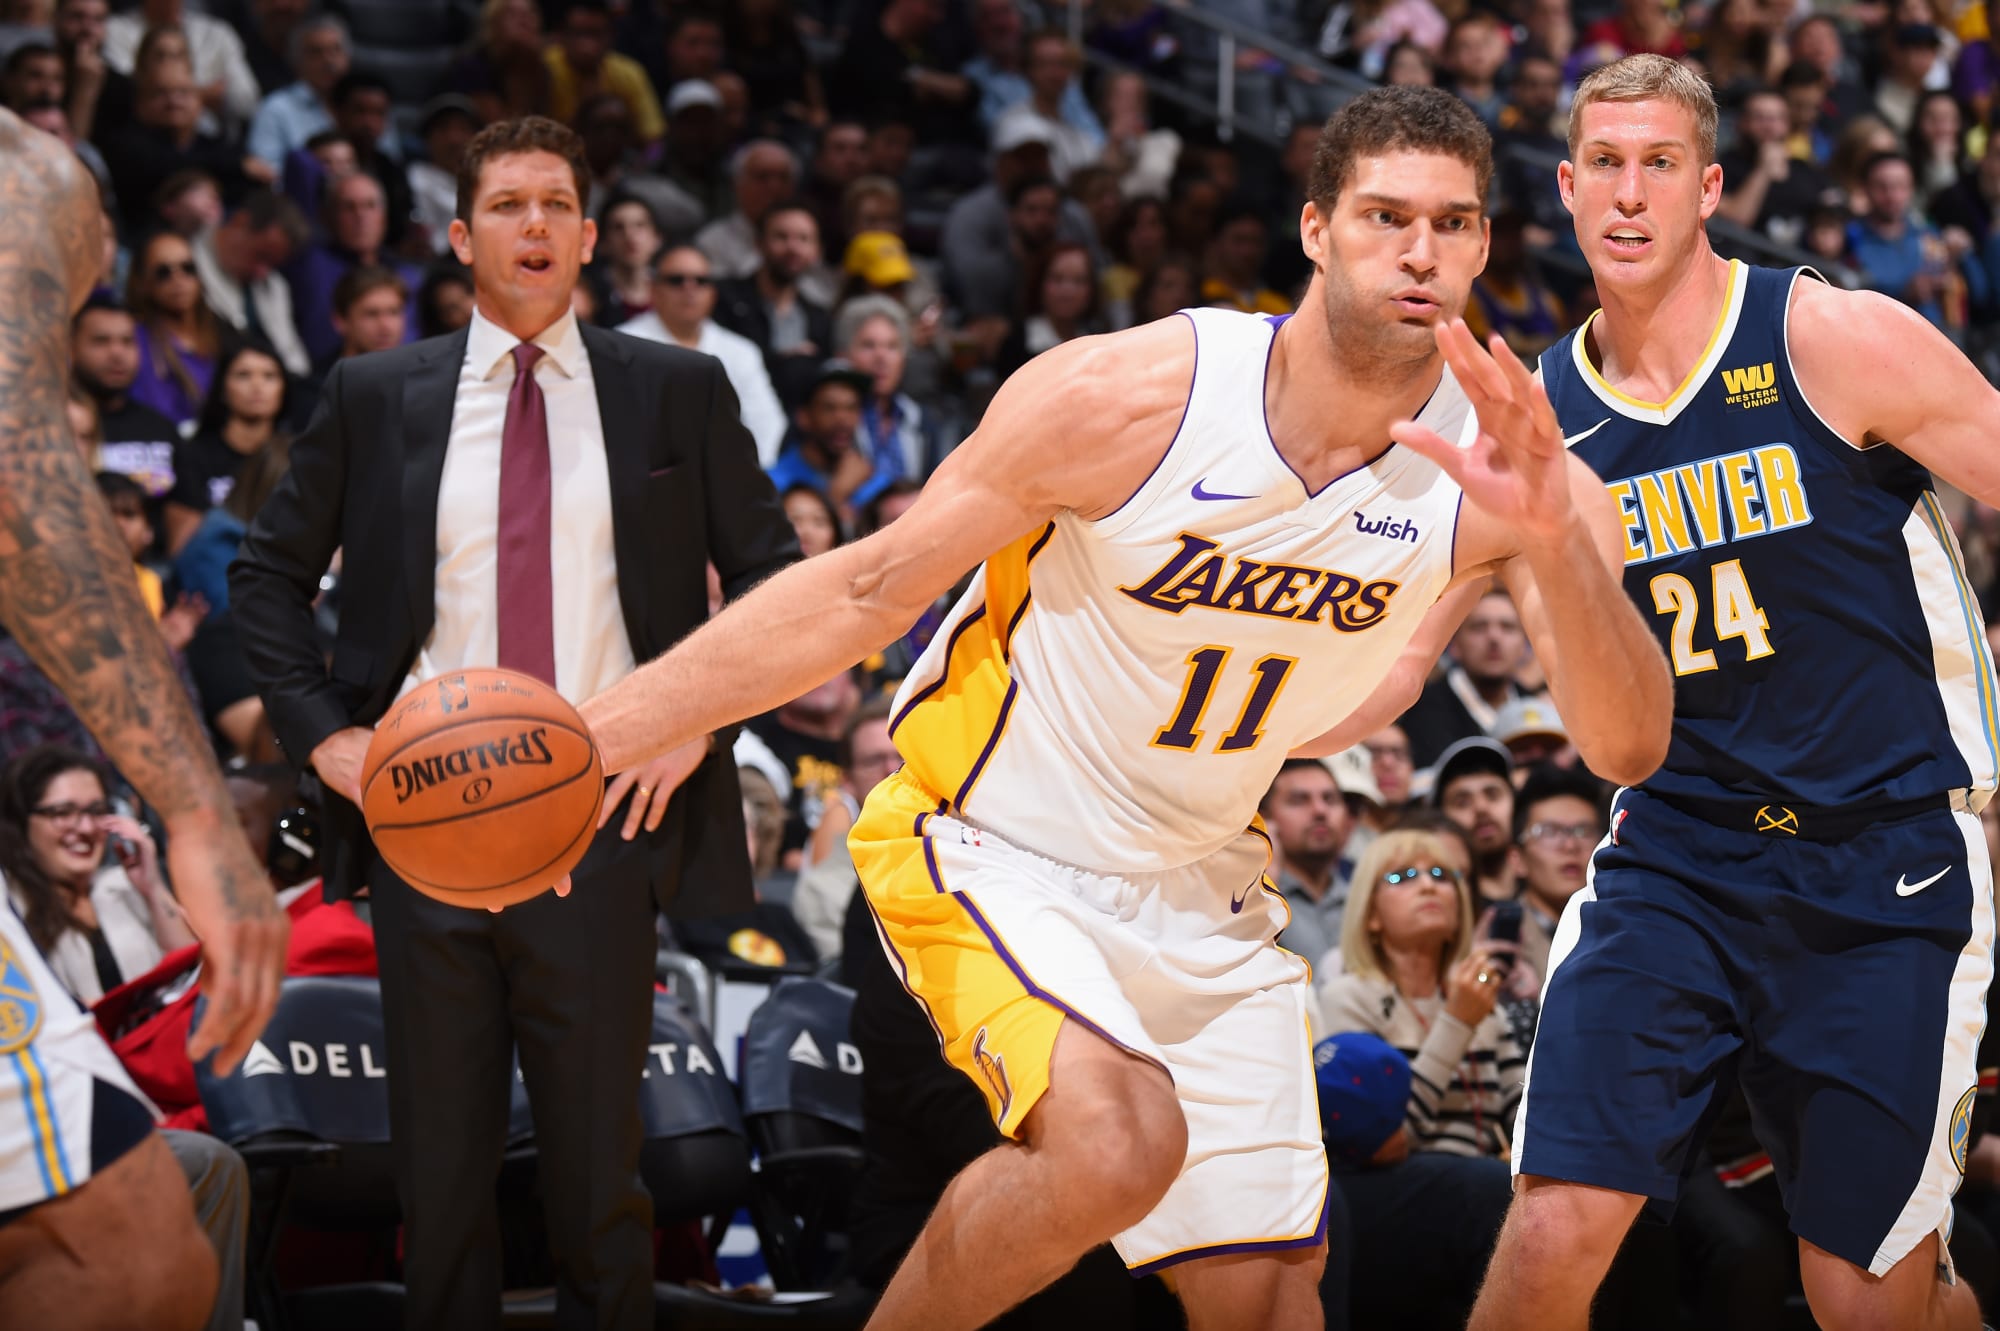 Los Angeles Lakers vs Denver Nuggets recap and highlights